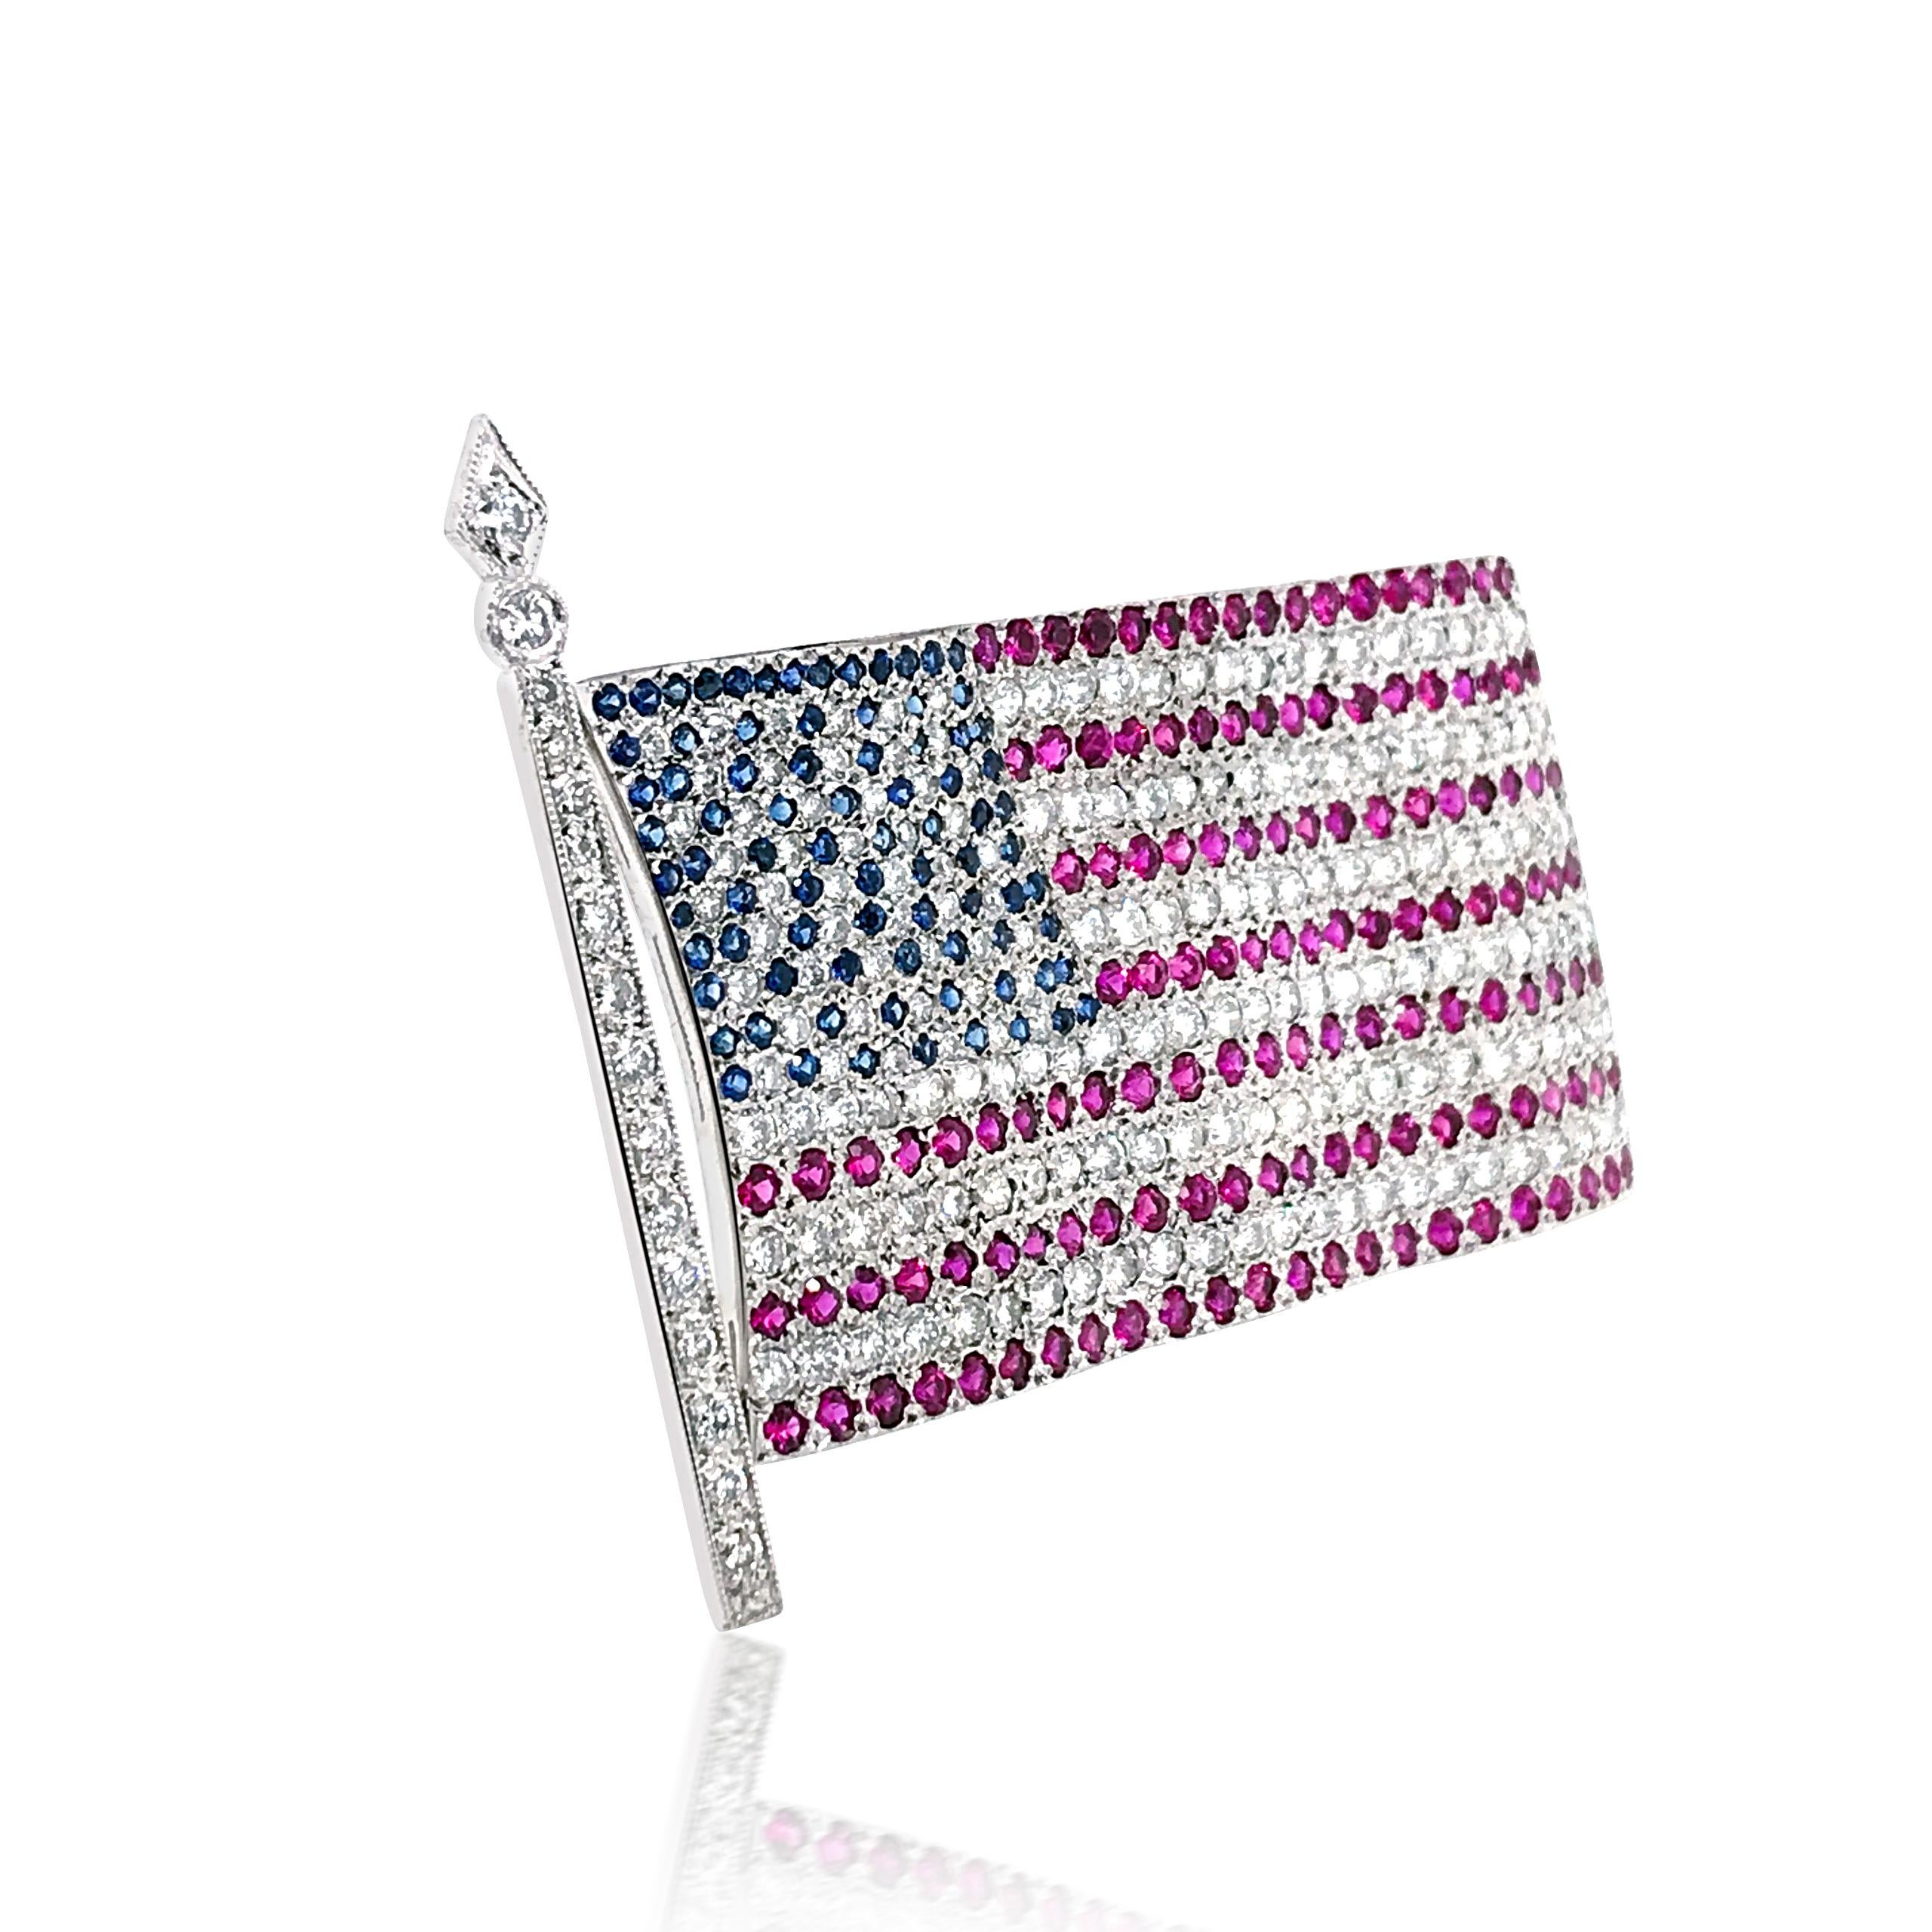 This American flag brooch features about 178 round diamonds size ranging from 0.025 to 0.01cts cumulatively weighing approx. 4.2cts. The stripes on the flag contain 135 round rubies cumulatively weighing approx. 4.1ct, and the stars on the flag